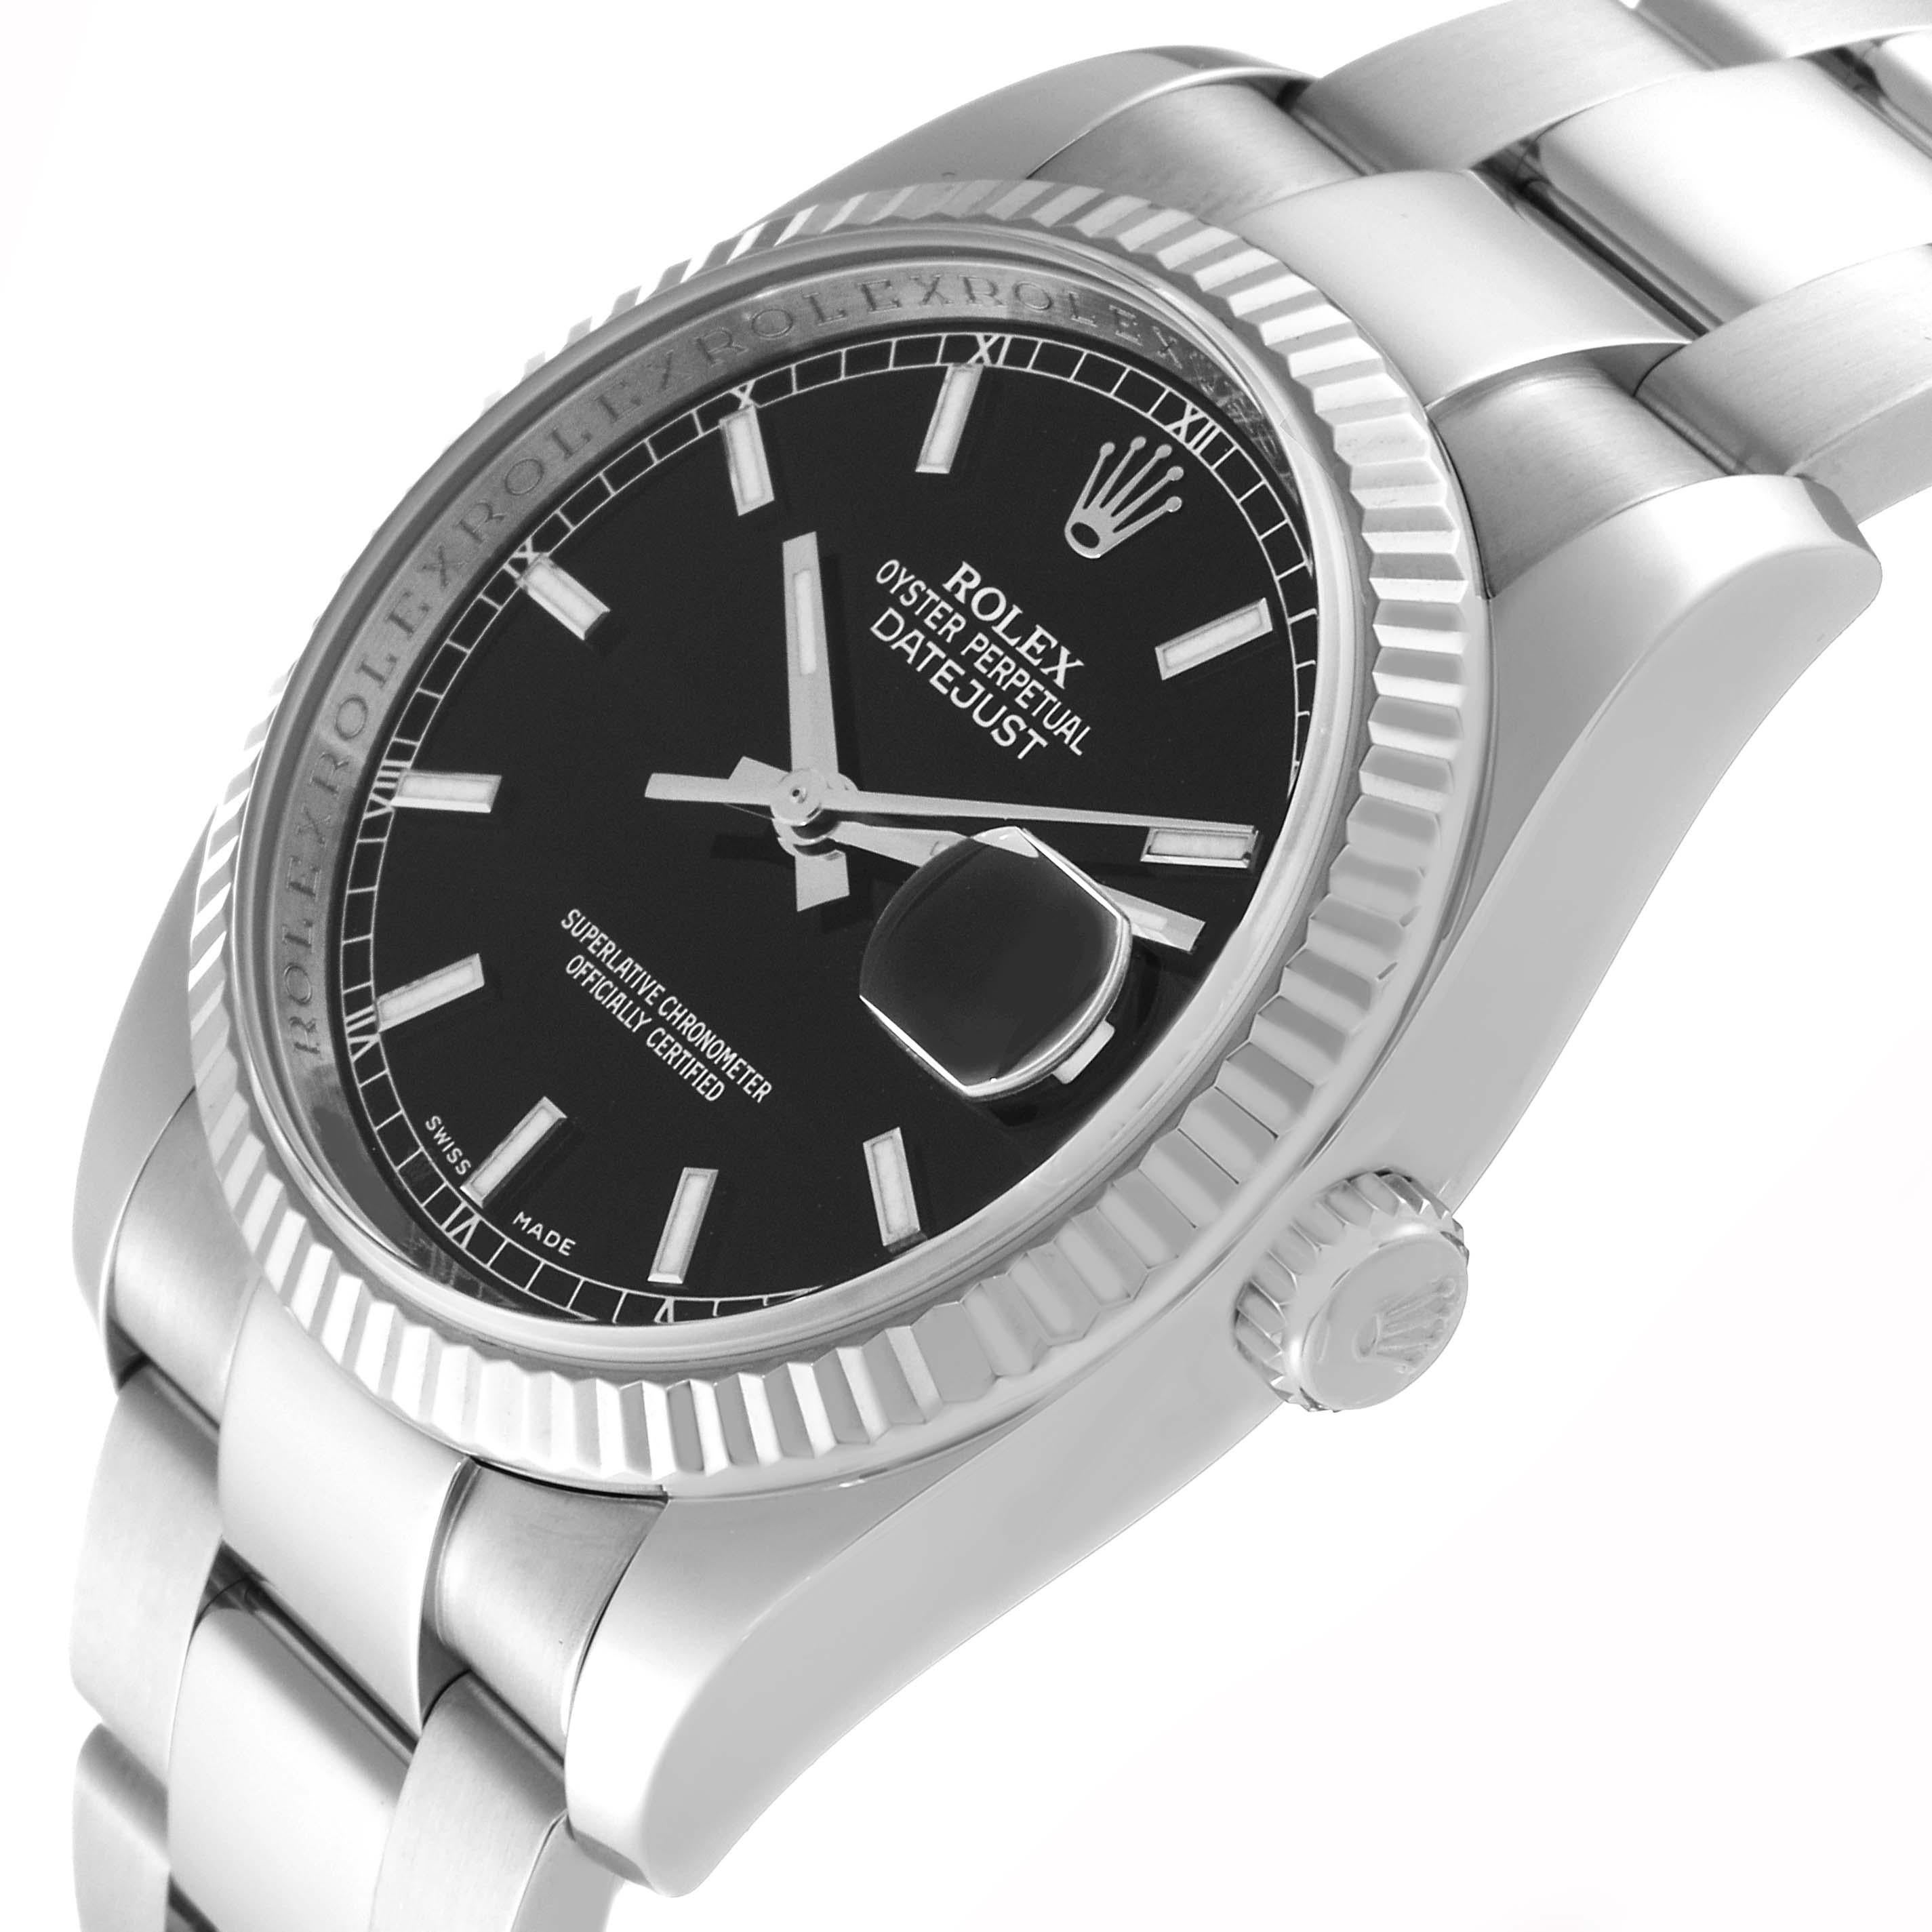 Rolex Datejust Steel White Gold Fluted Bezel Black Dial Mens Watch 116234 For Sale 3